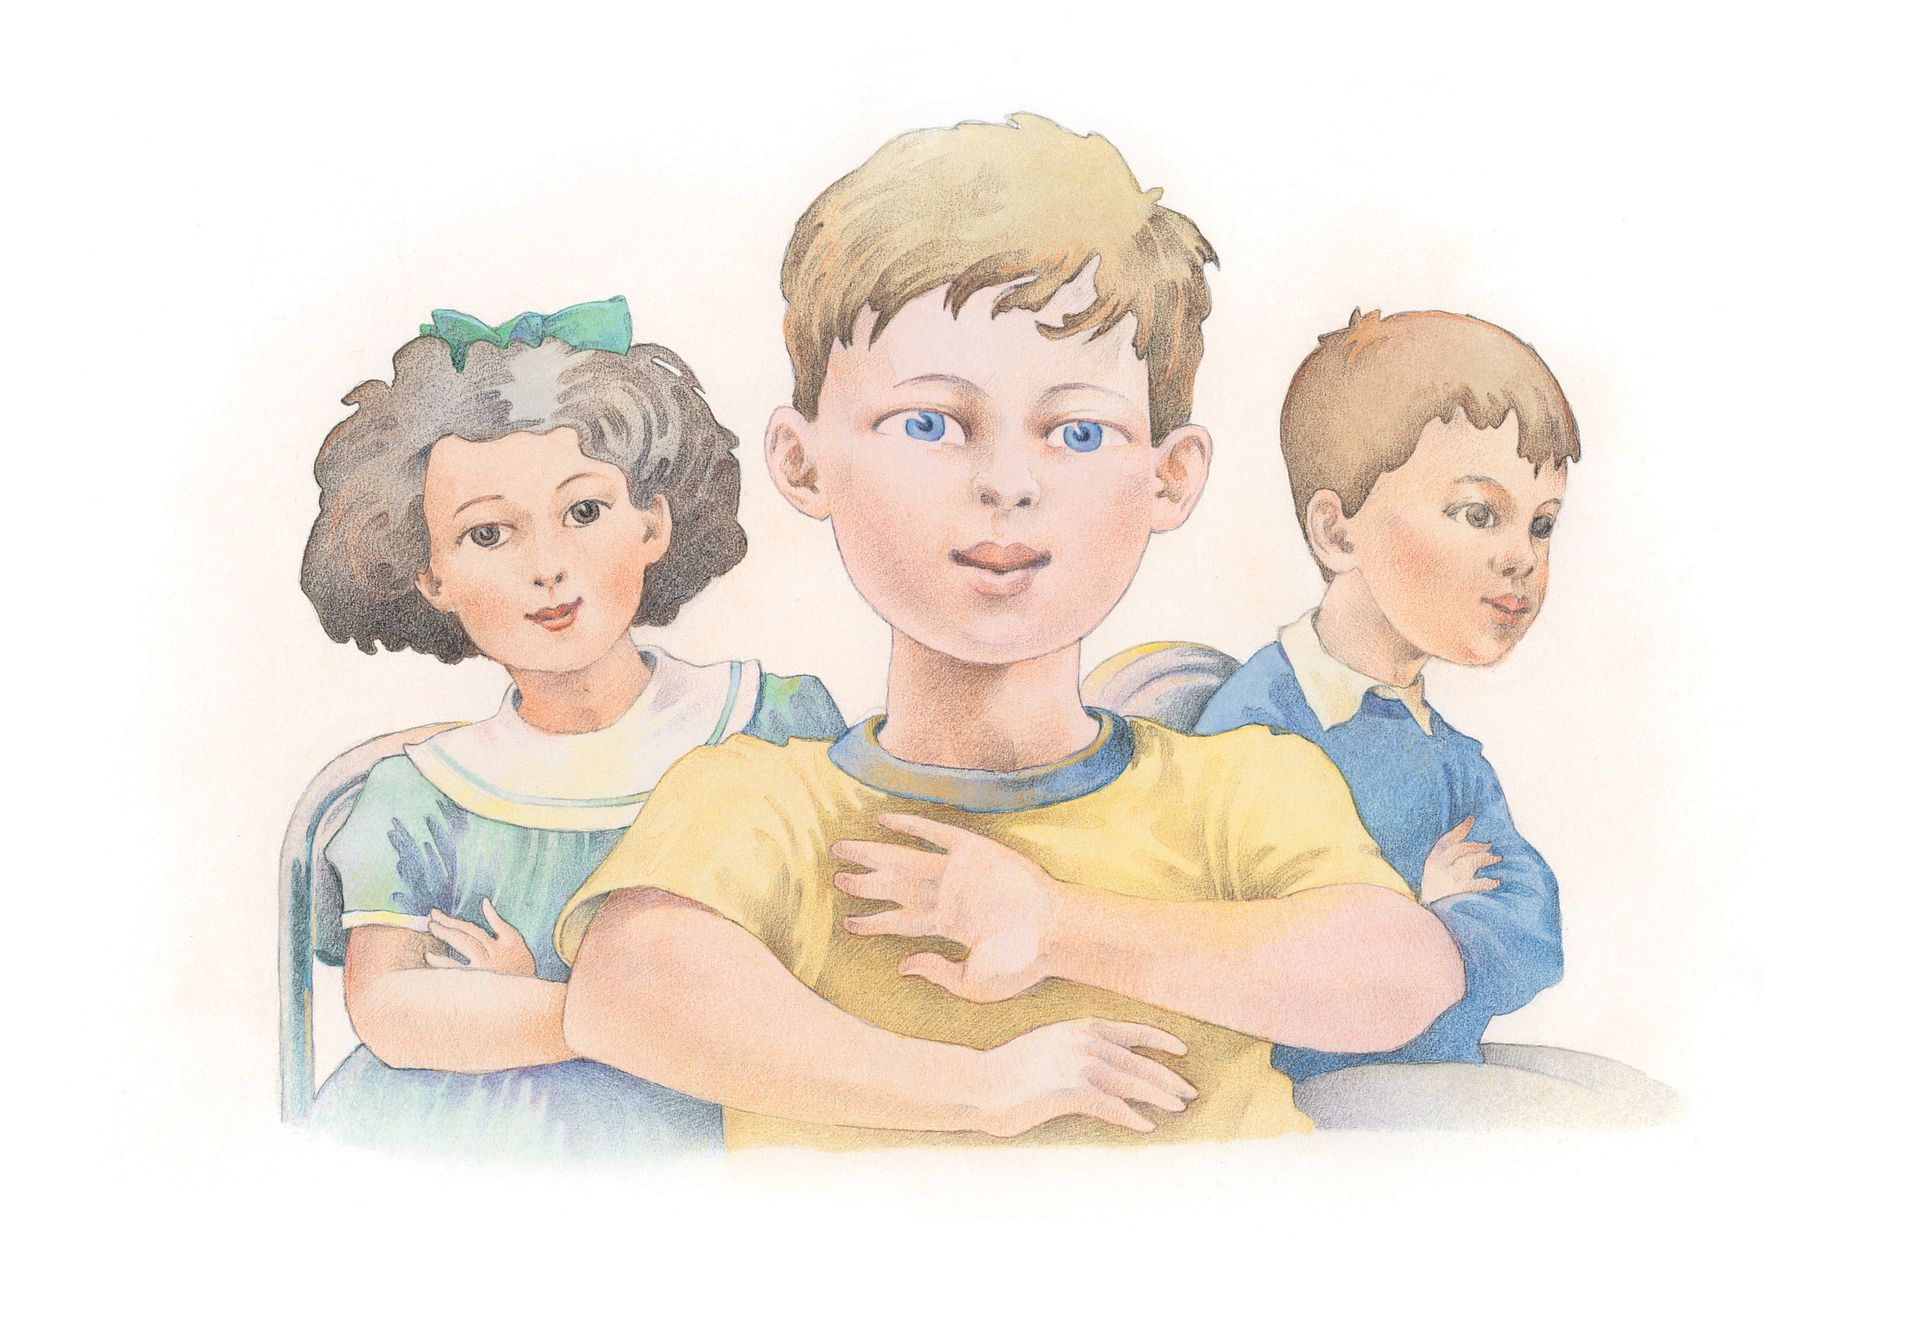 Three children rolling their hands while singing a song. From the Children’s Songbook, page 274, “Roll Your Hands”; watercolor illustration by Richard Hull.